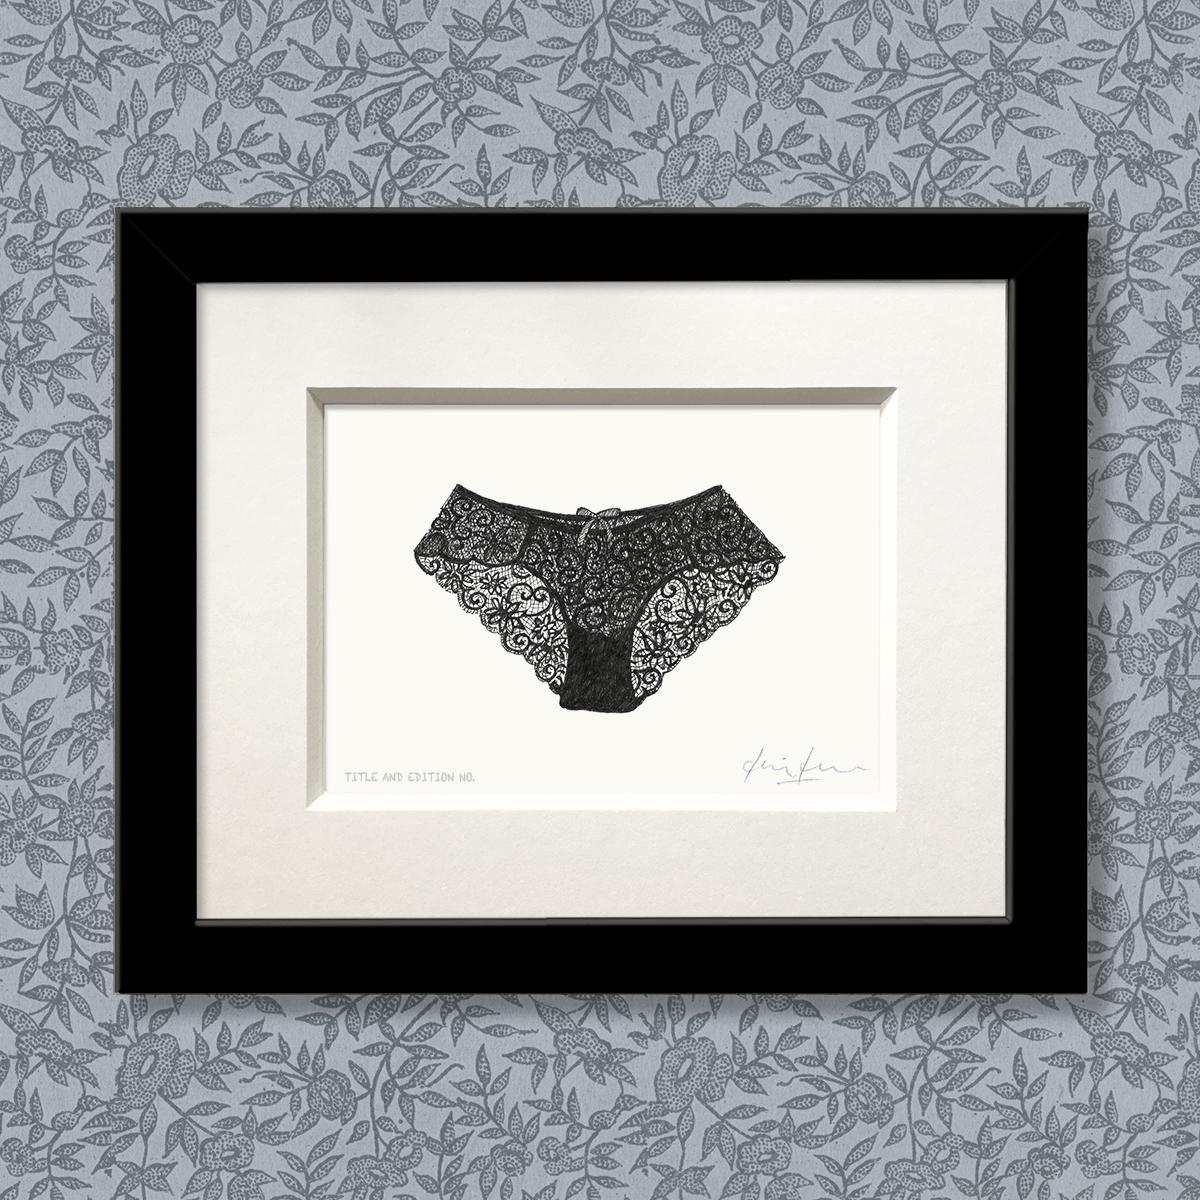 Limited edition print from pen and ink drawing of a pair of lacy knickers in a black frame